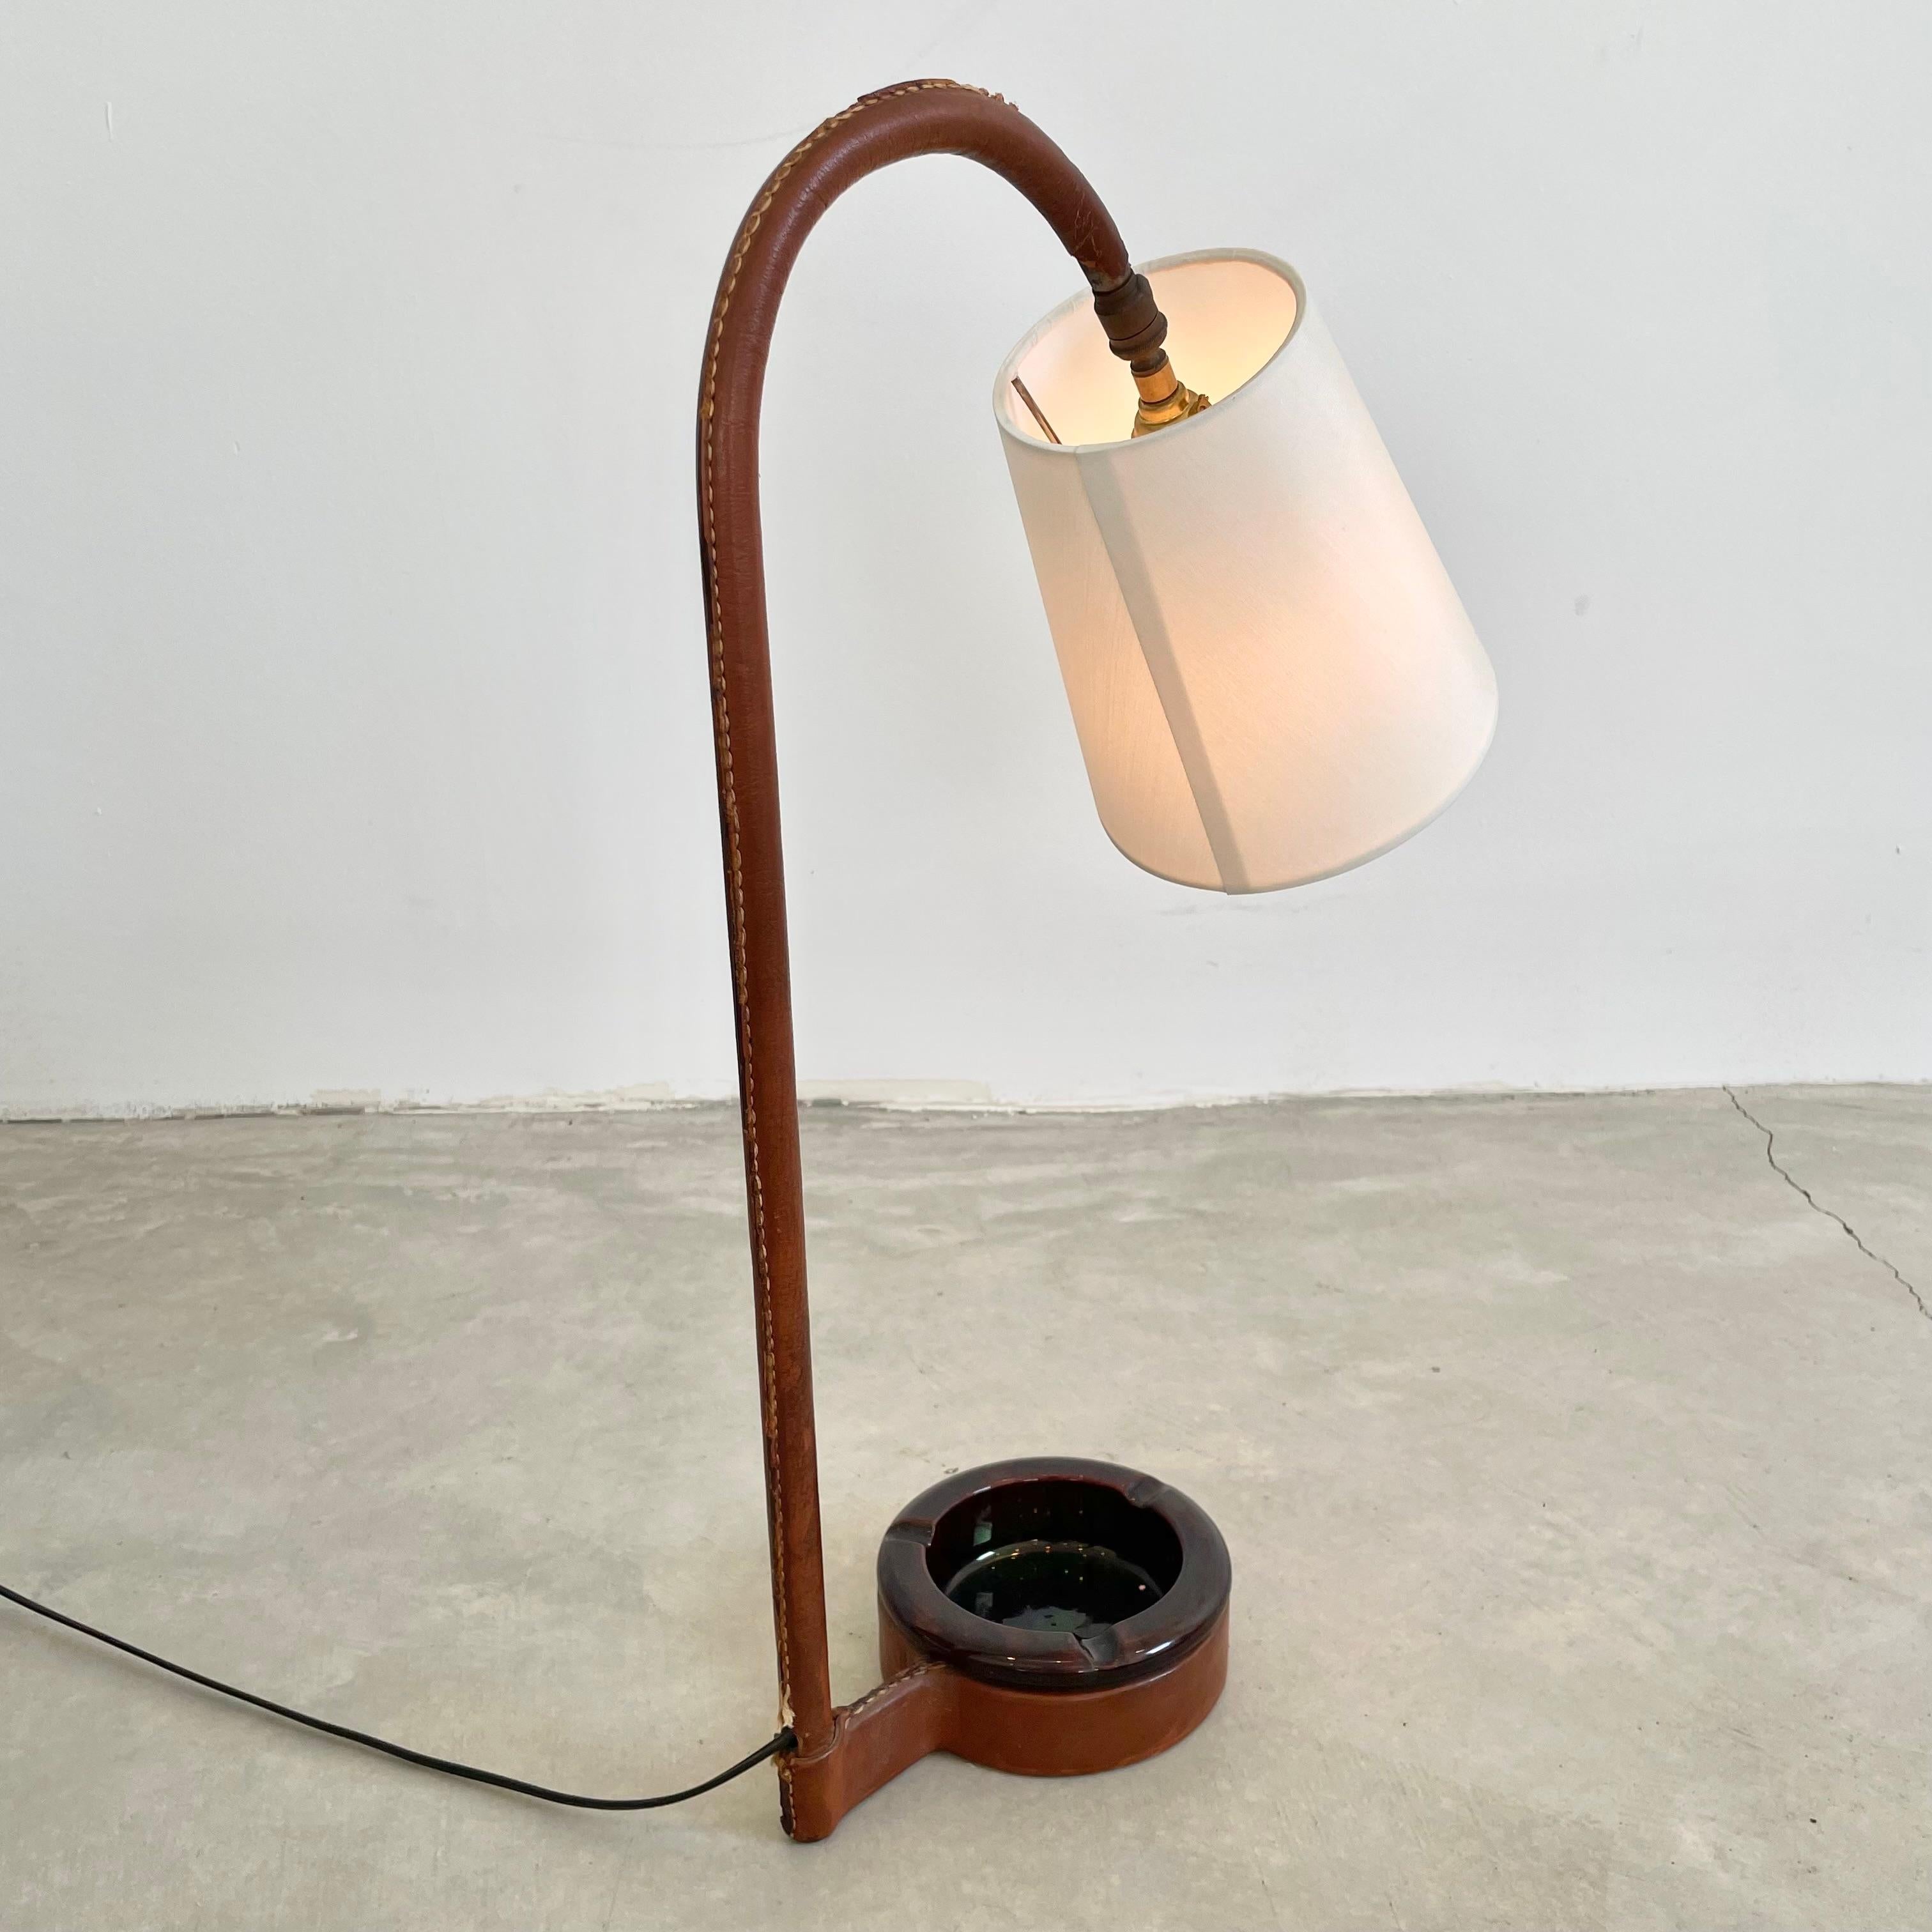 Metal Jacques Adnet Leather Table Lamp with Built-in Catchall, 1950s France For Sale